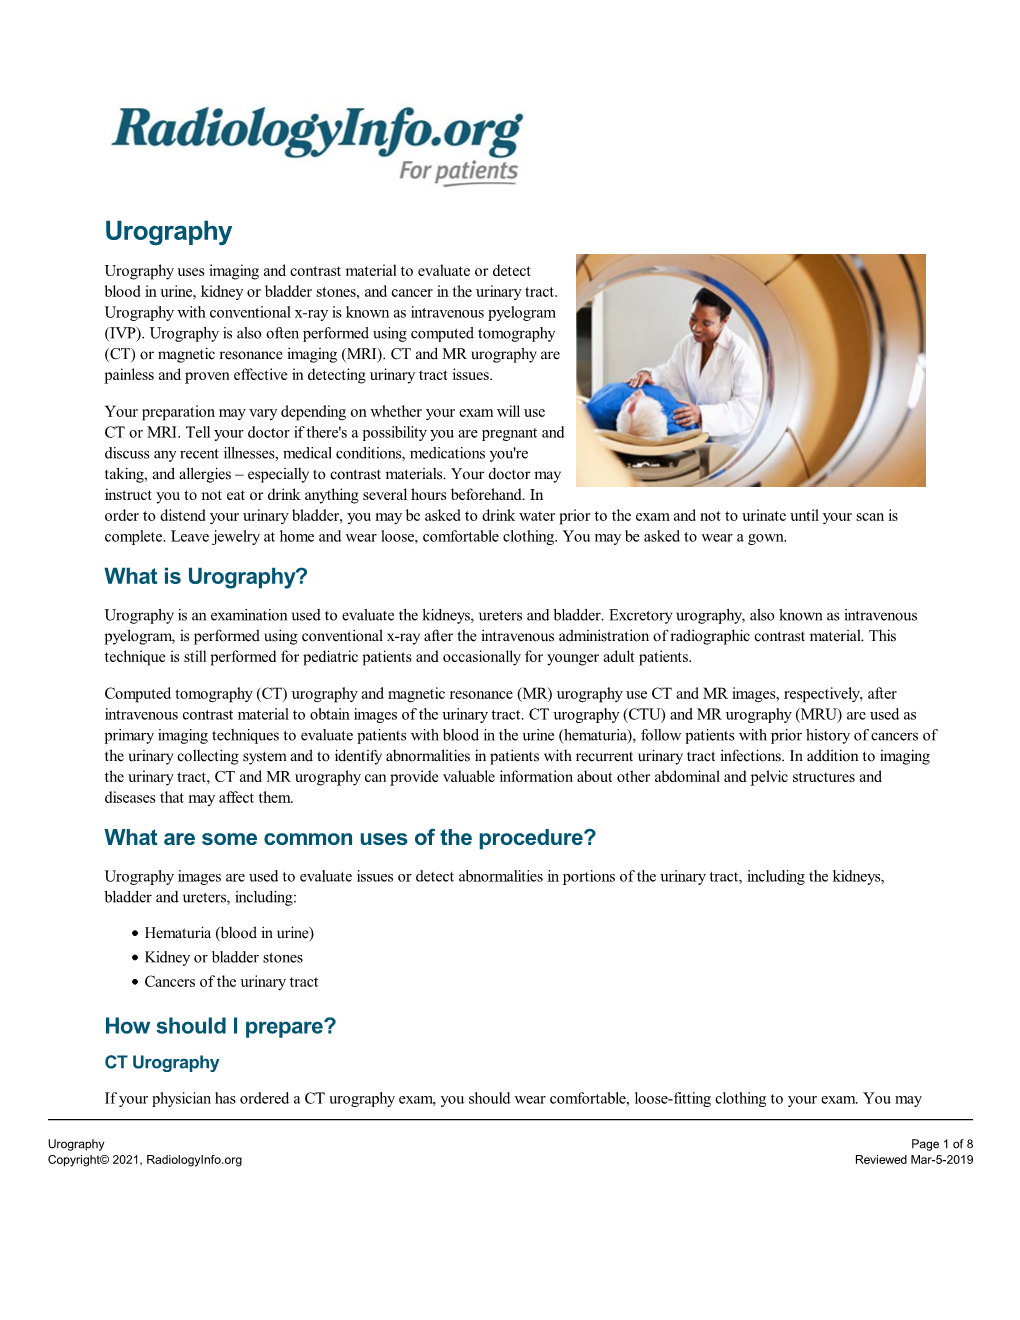 Urography Urography Uses Imaging and Contrast Material to Evaluate Or Detect Blood in Urine, Kidney Or Bladder Stones, and Cancer in the Urinary Tract